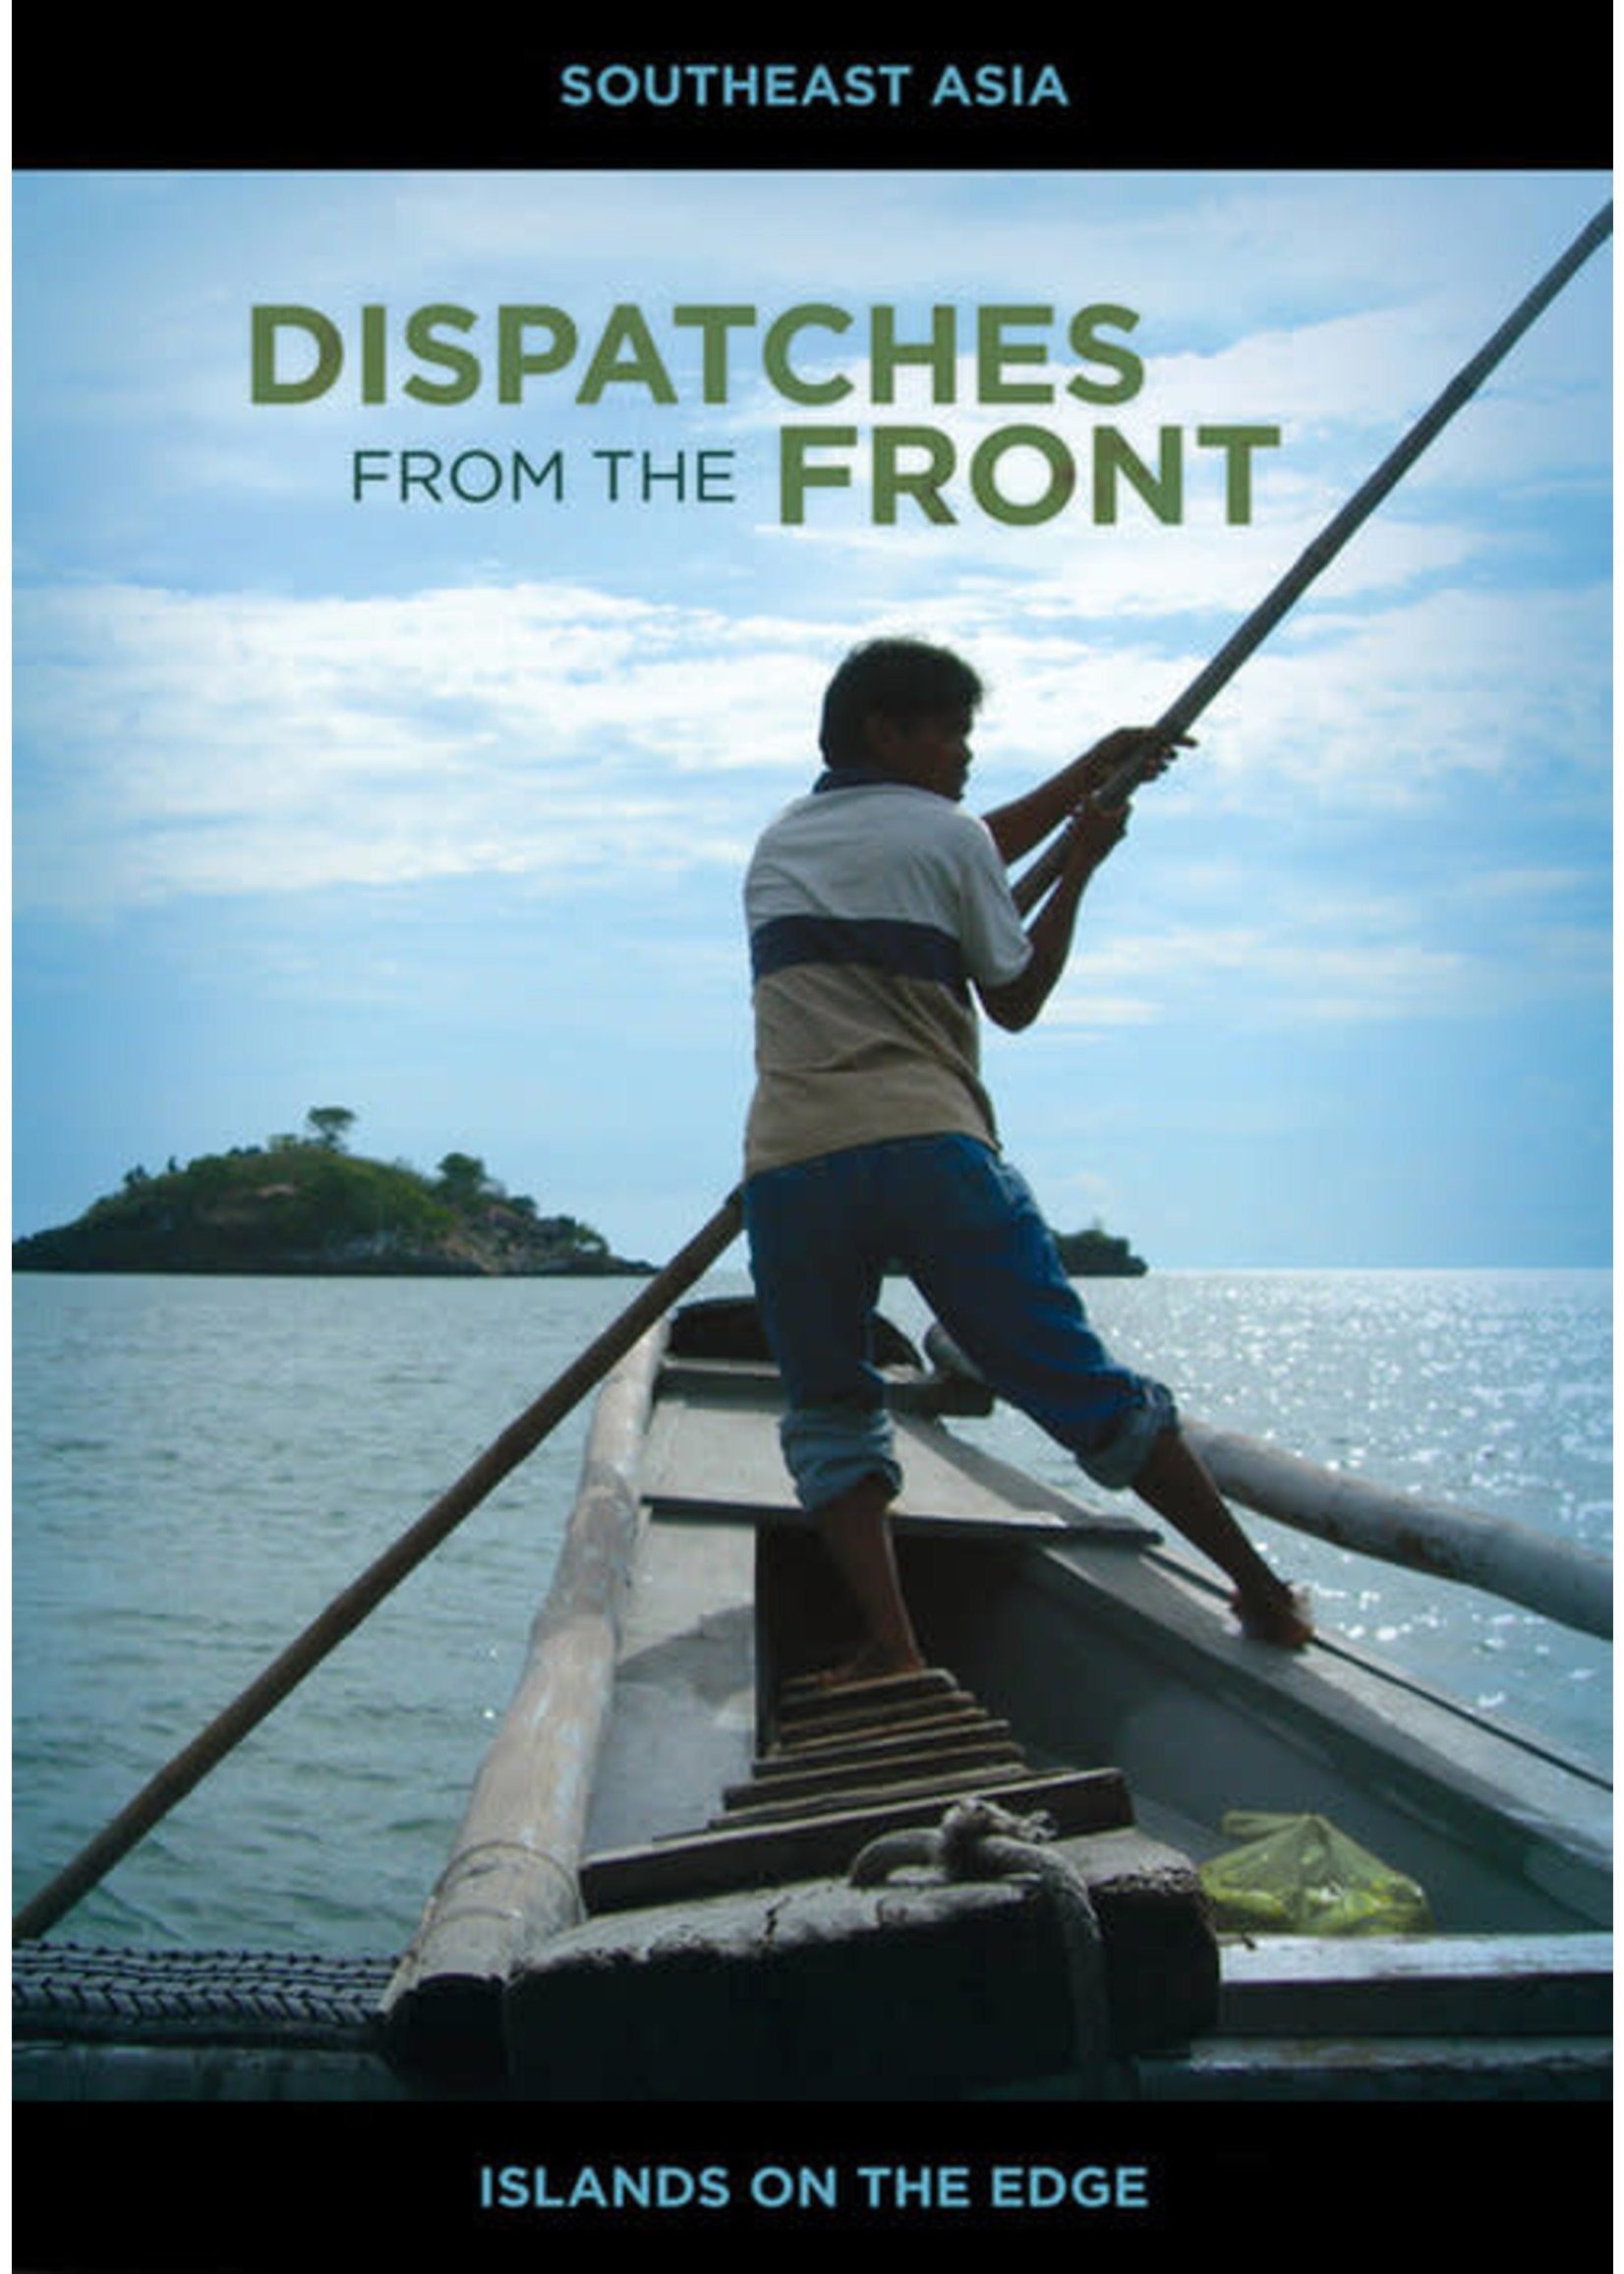 Dispatches from the Front #1 Islands on the Edge (Southeast Asia)